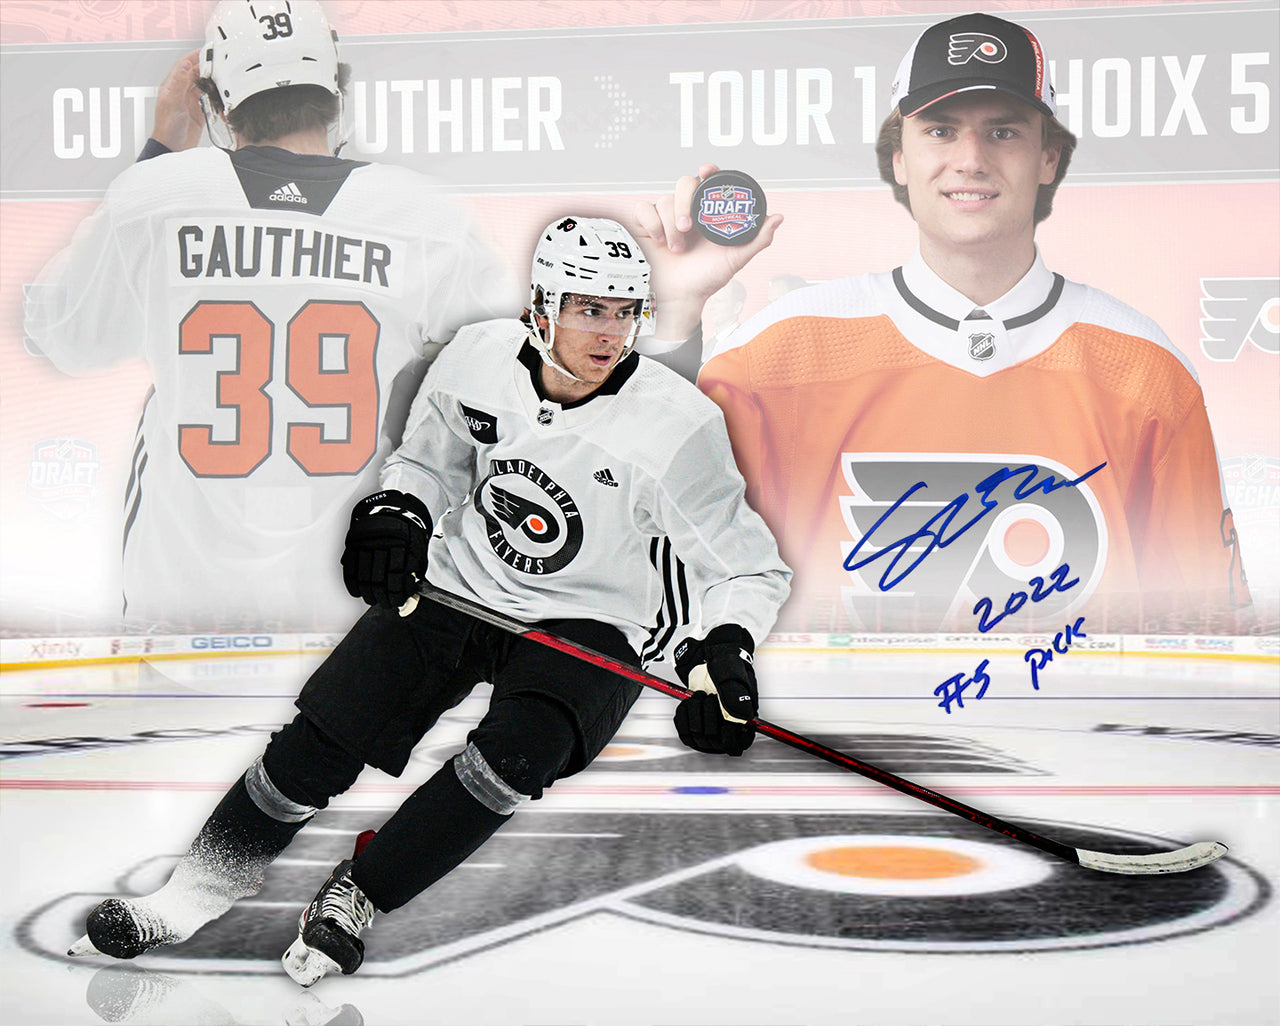 Cutter Gauthier Philadelphia Flyers Autographed 11x14 Draft Hockey Collage Photo Inscribed #5 Pick - Dynasty Sports & Framing 